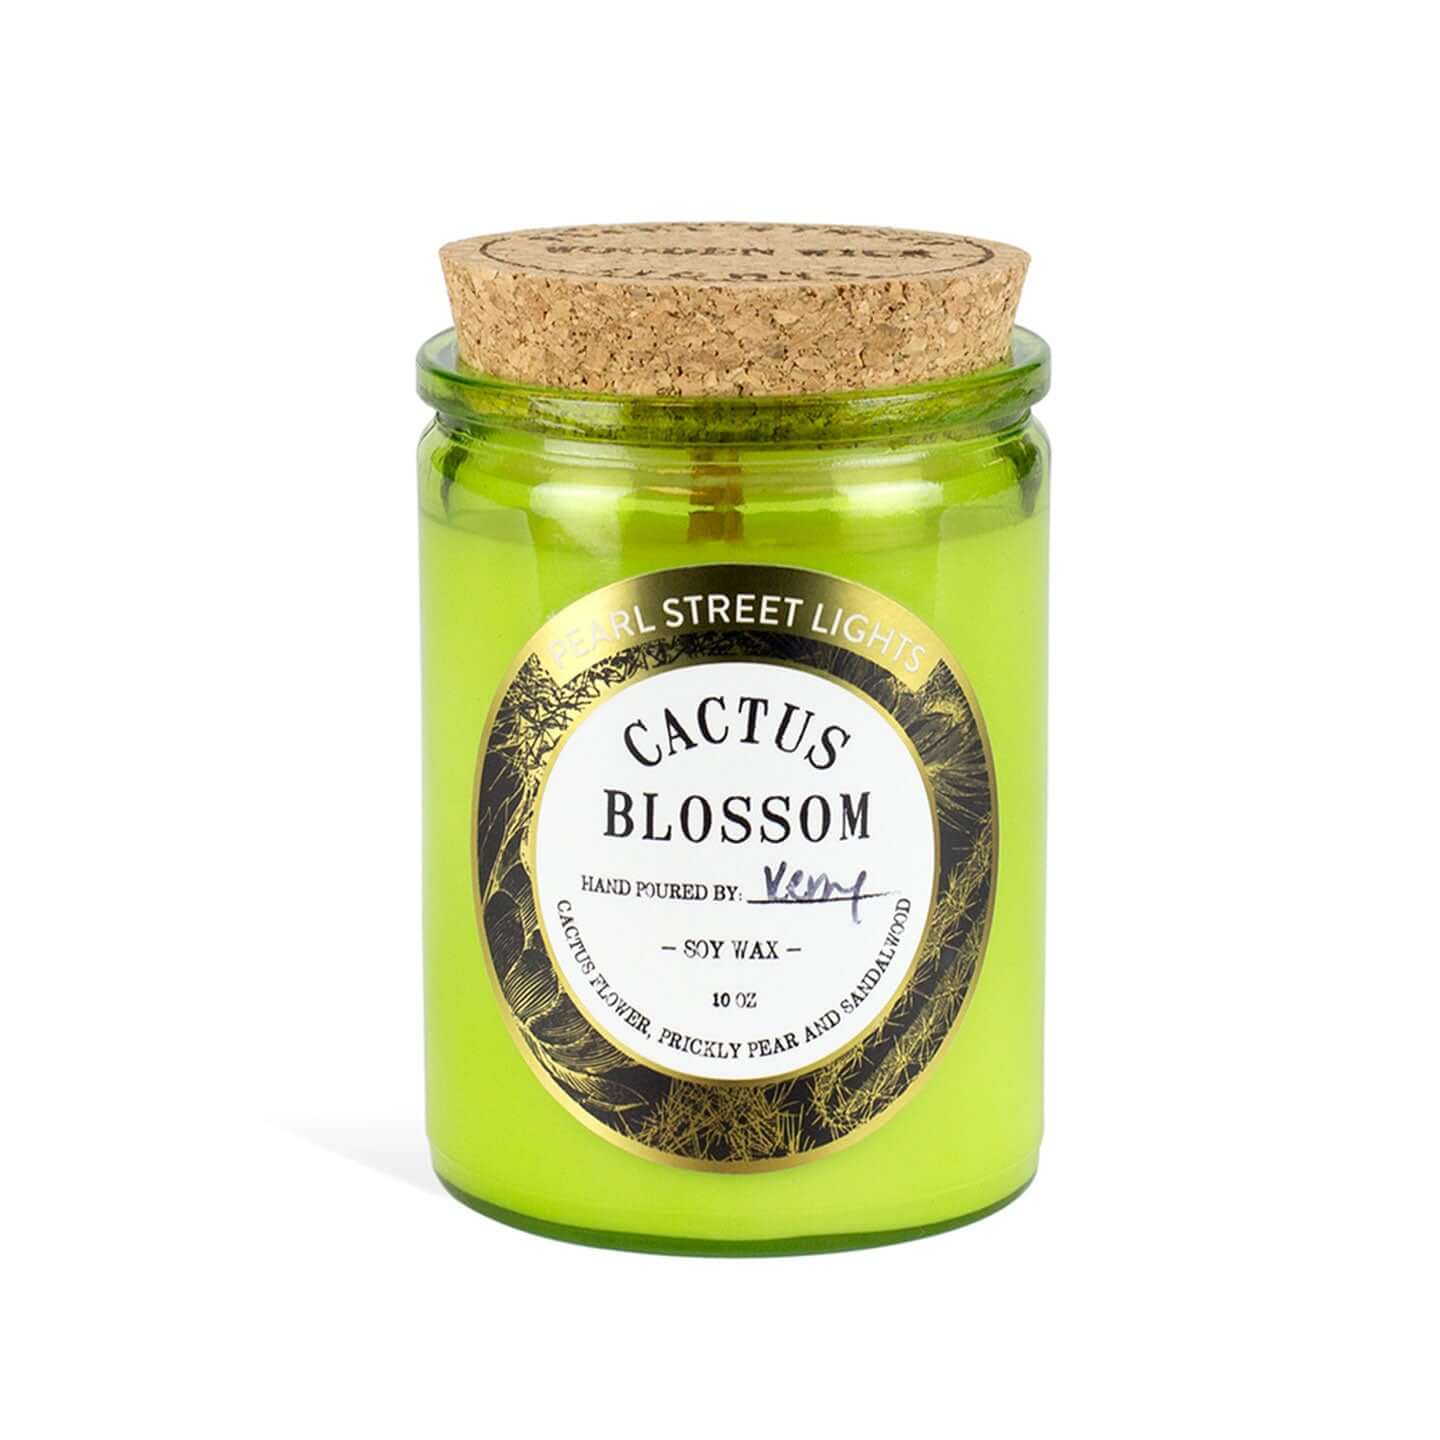 Cactus Blossom Candle - Pearl Street Lights